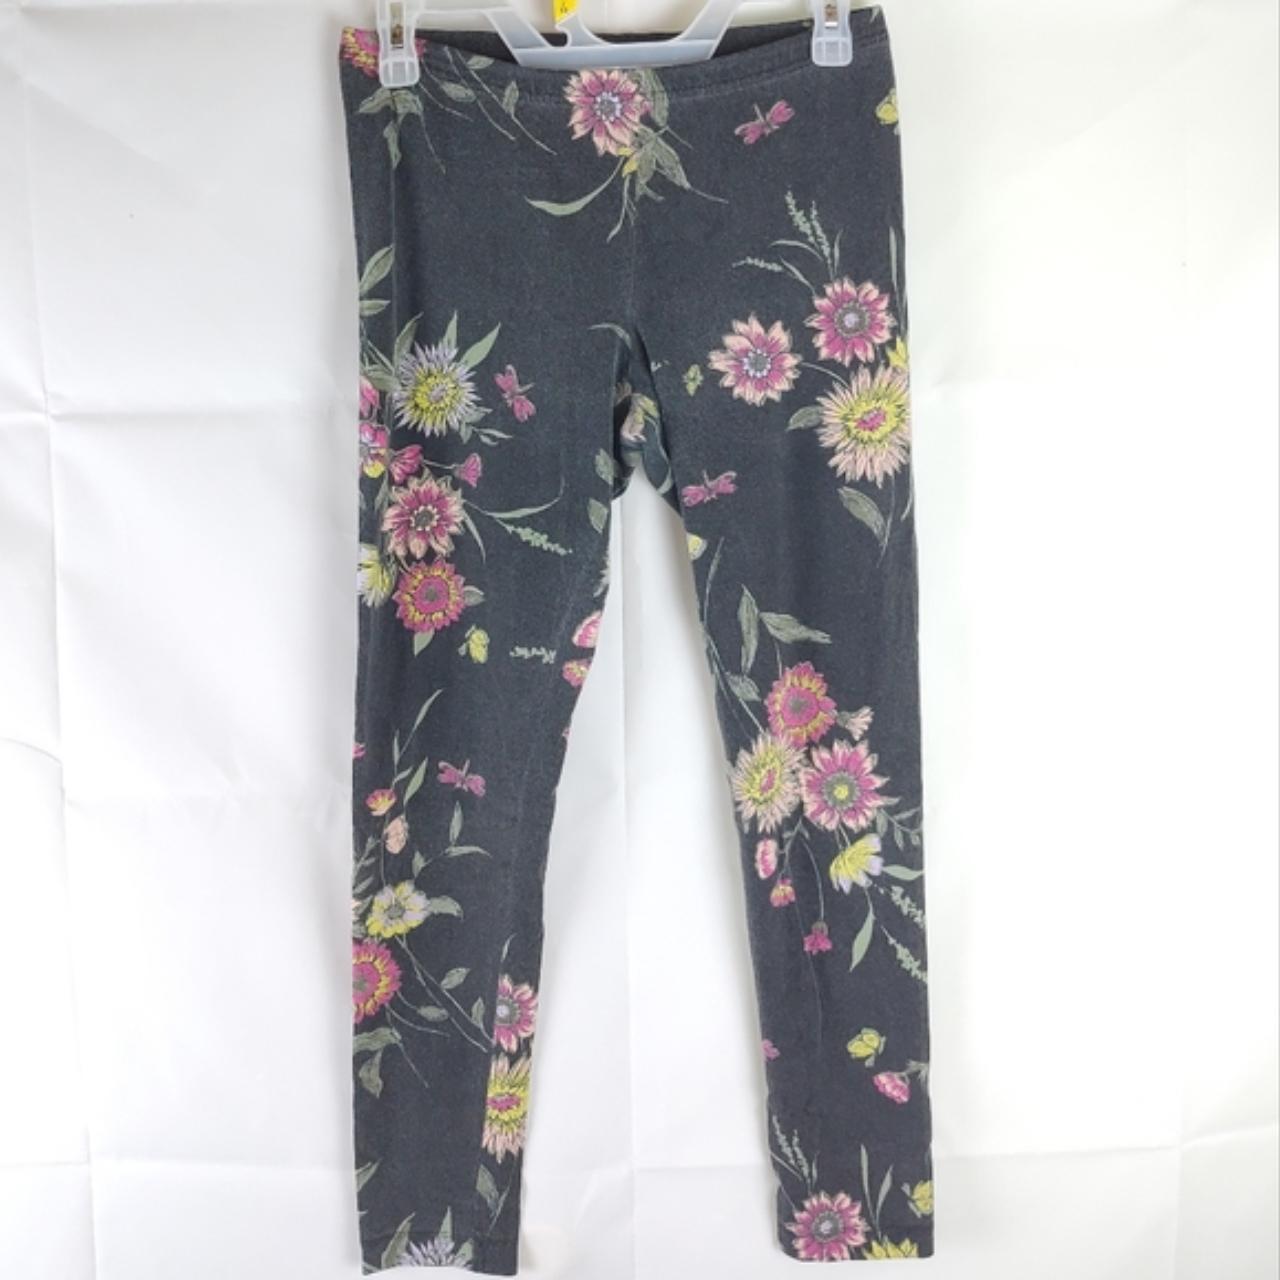 Floral print leggings, gently used. Cotton and - Depop